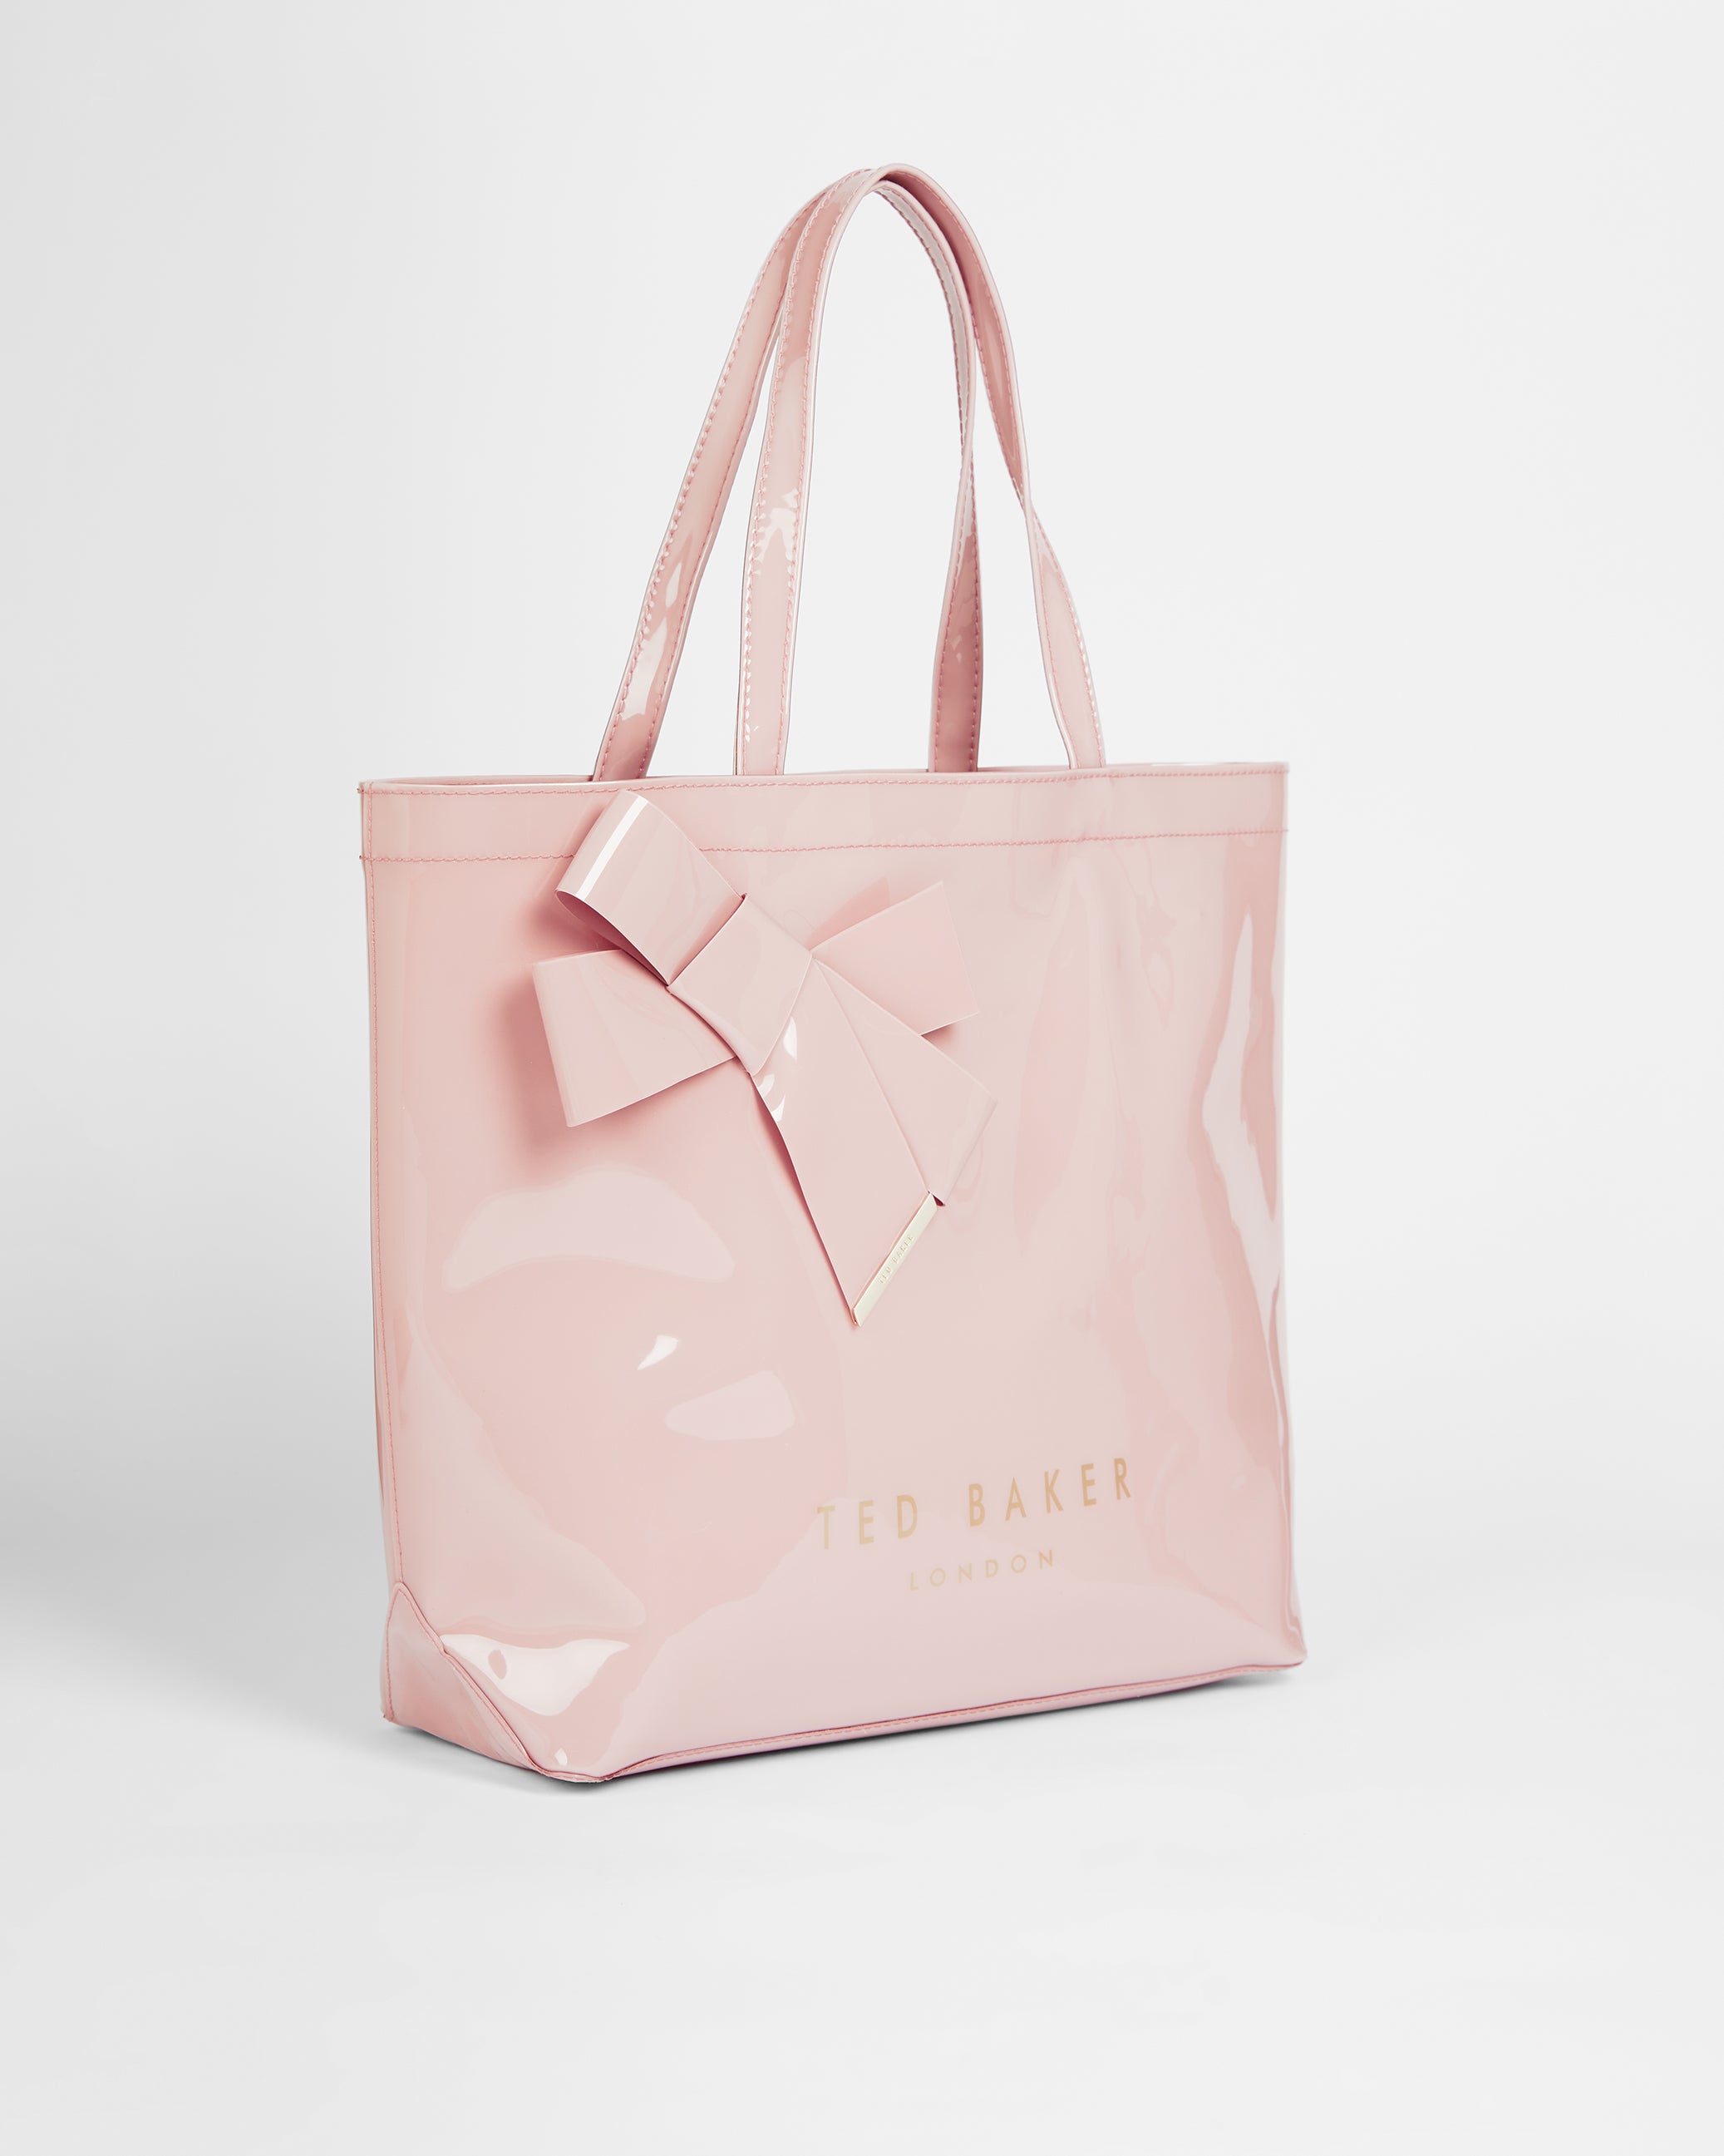 Ted Baker London Large Icon Porcelain Rose Tote available at #Nordstrom